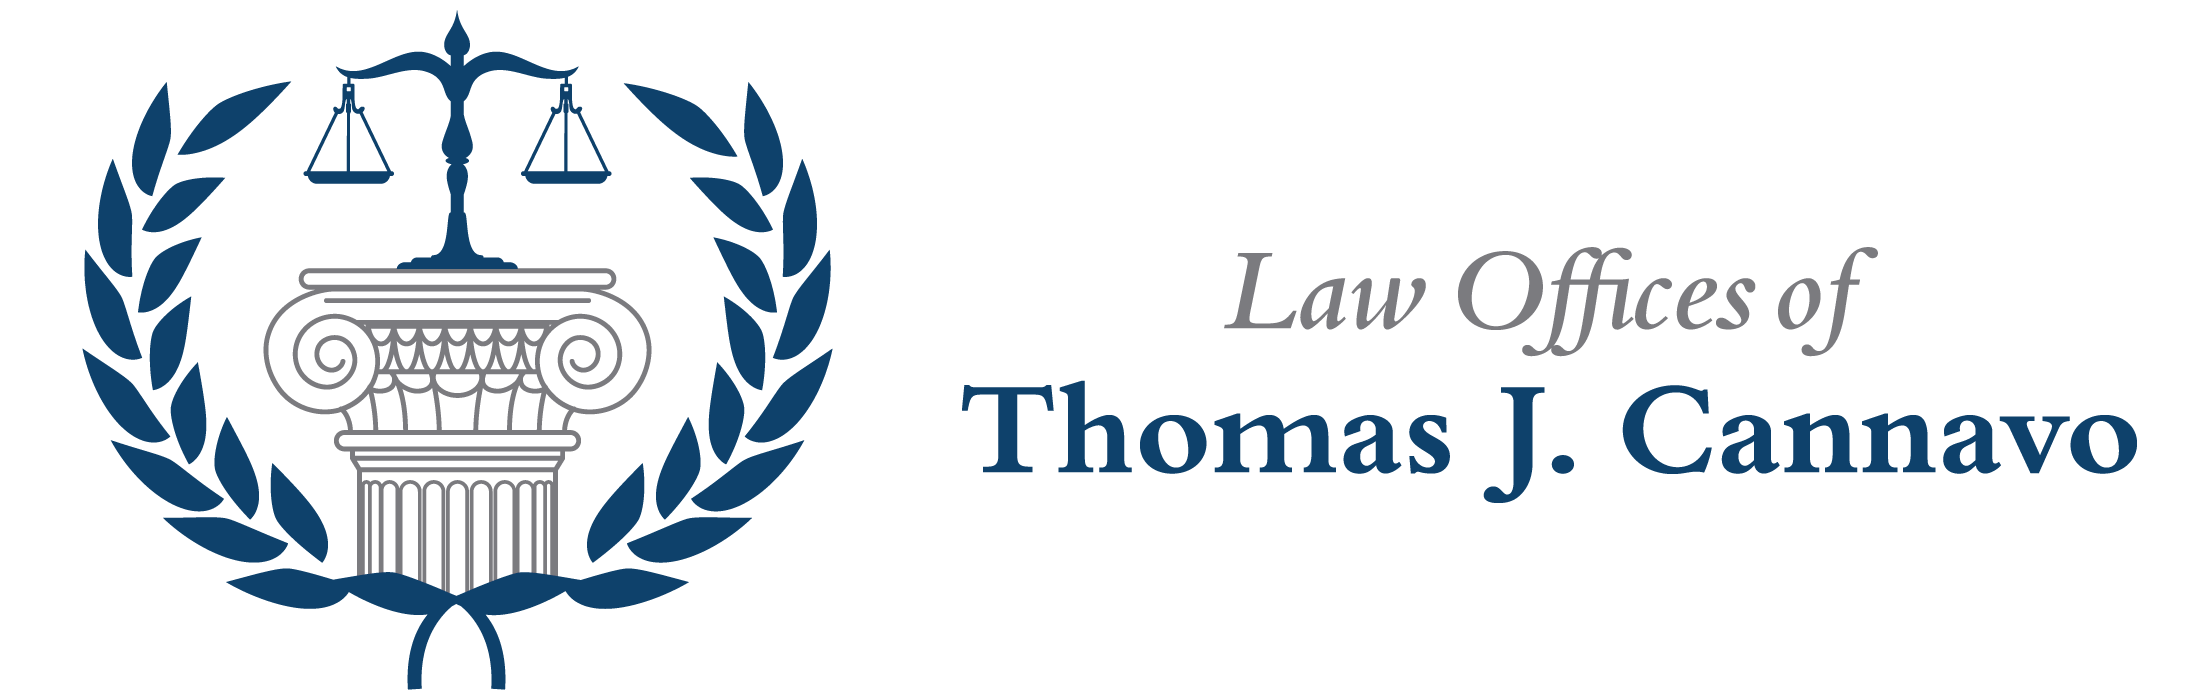 Law Offices of Thomas J. Cannavo